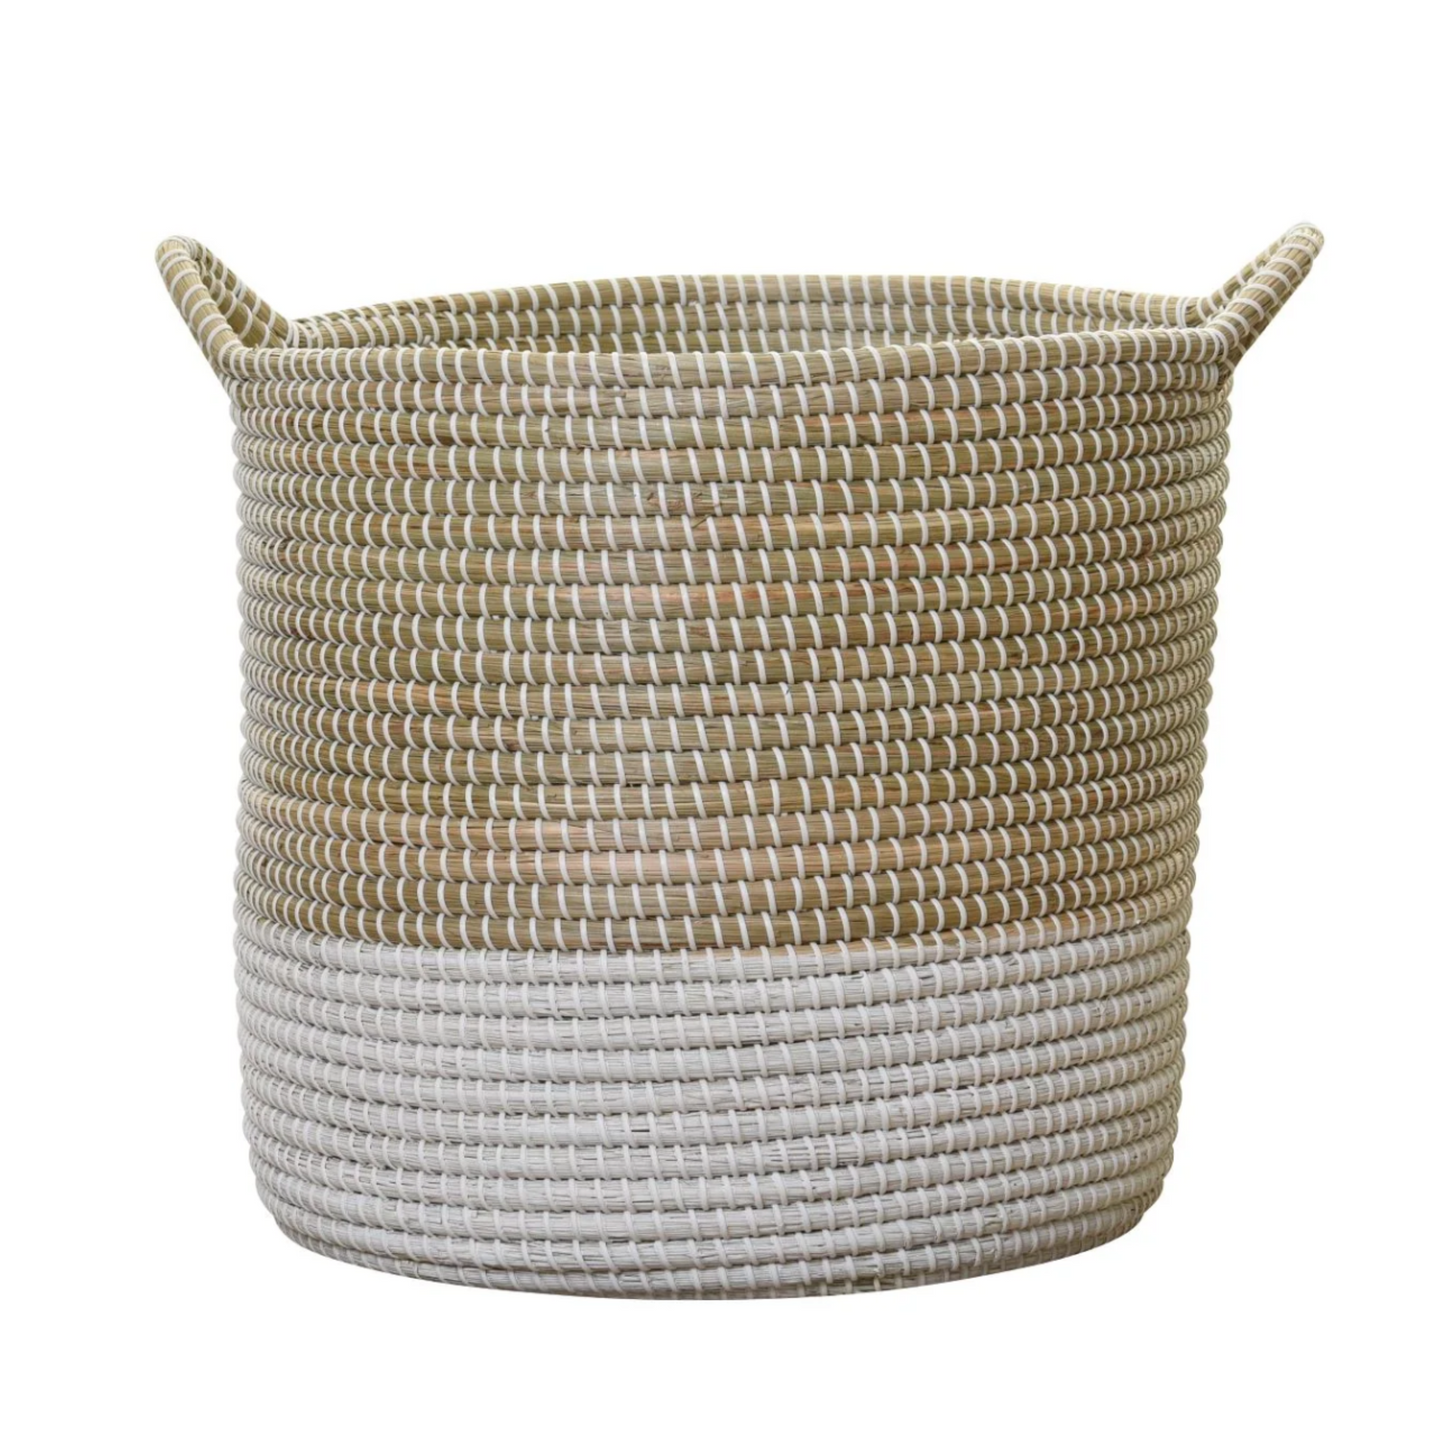 Woven basket with white dip